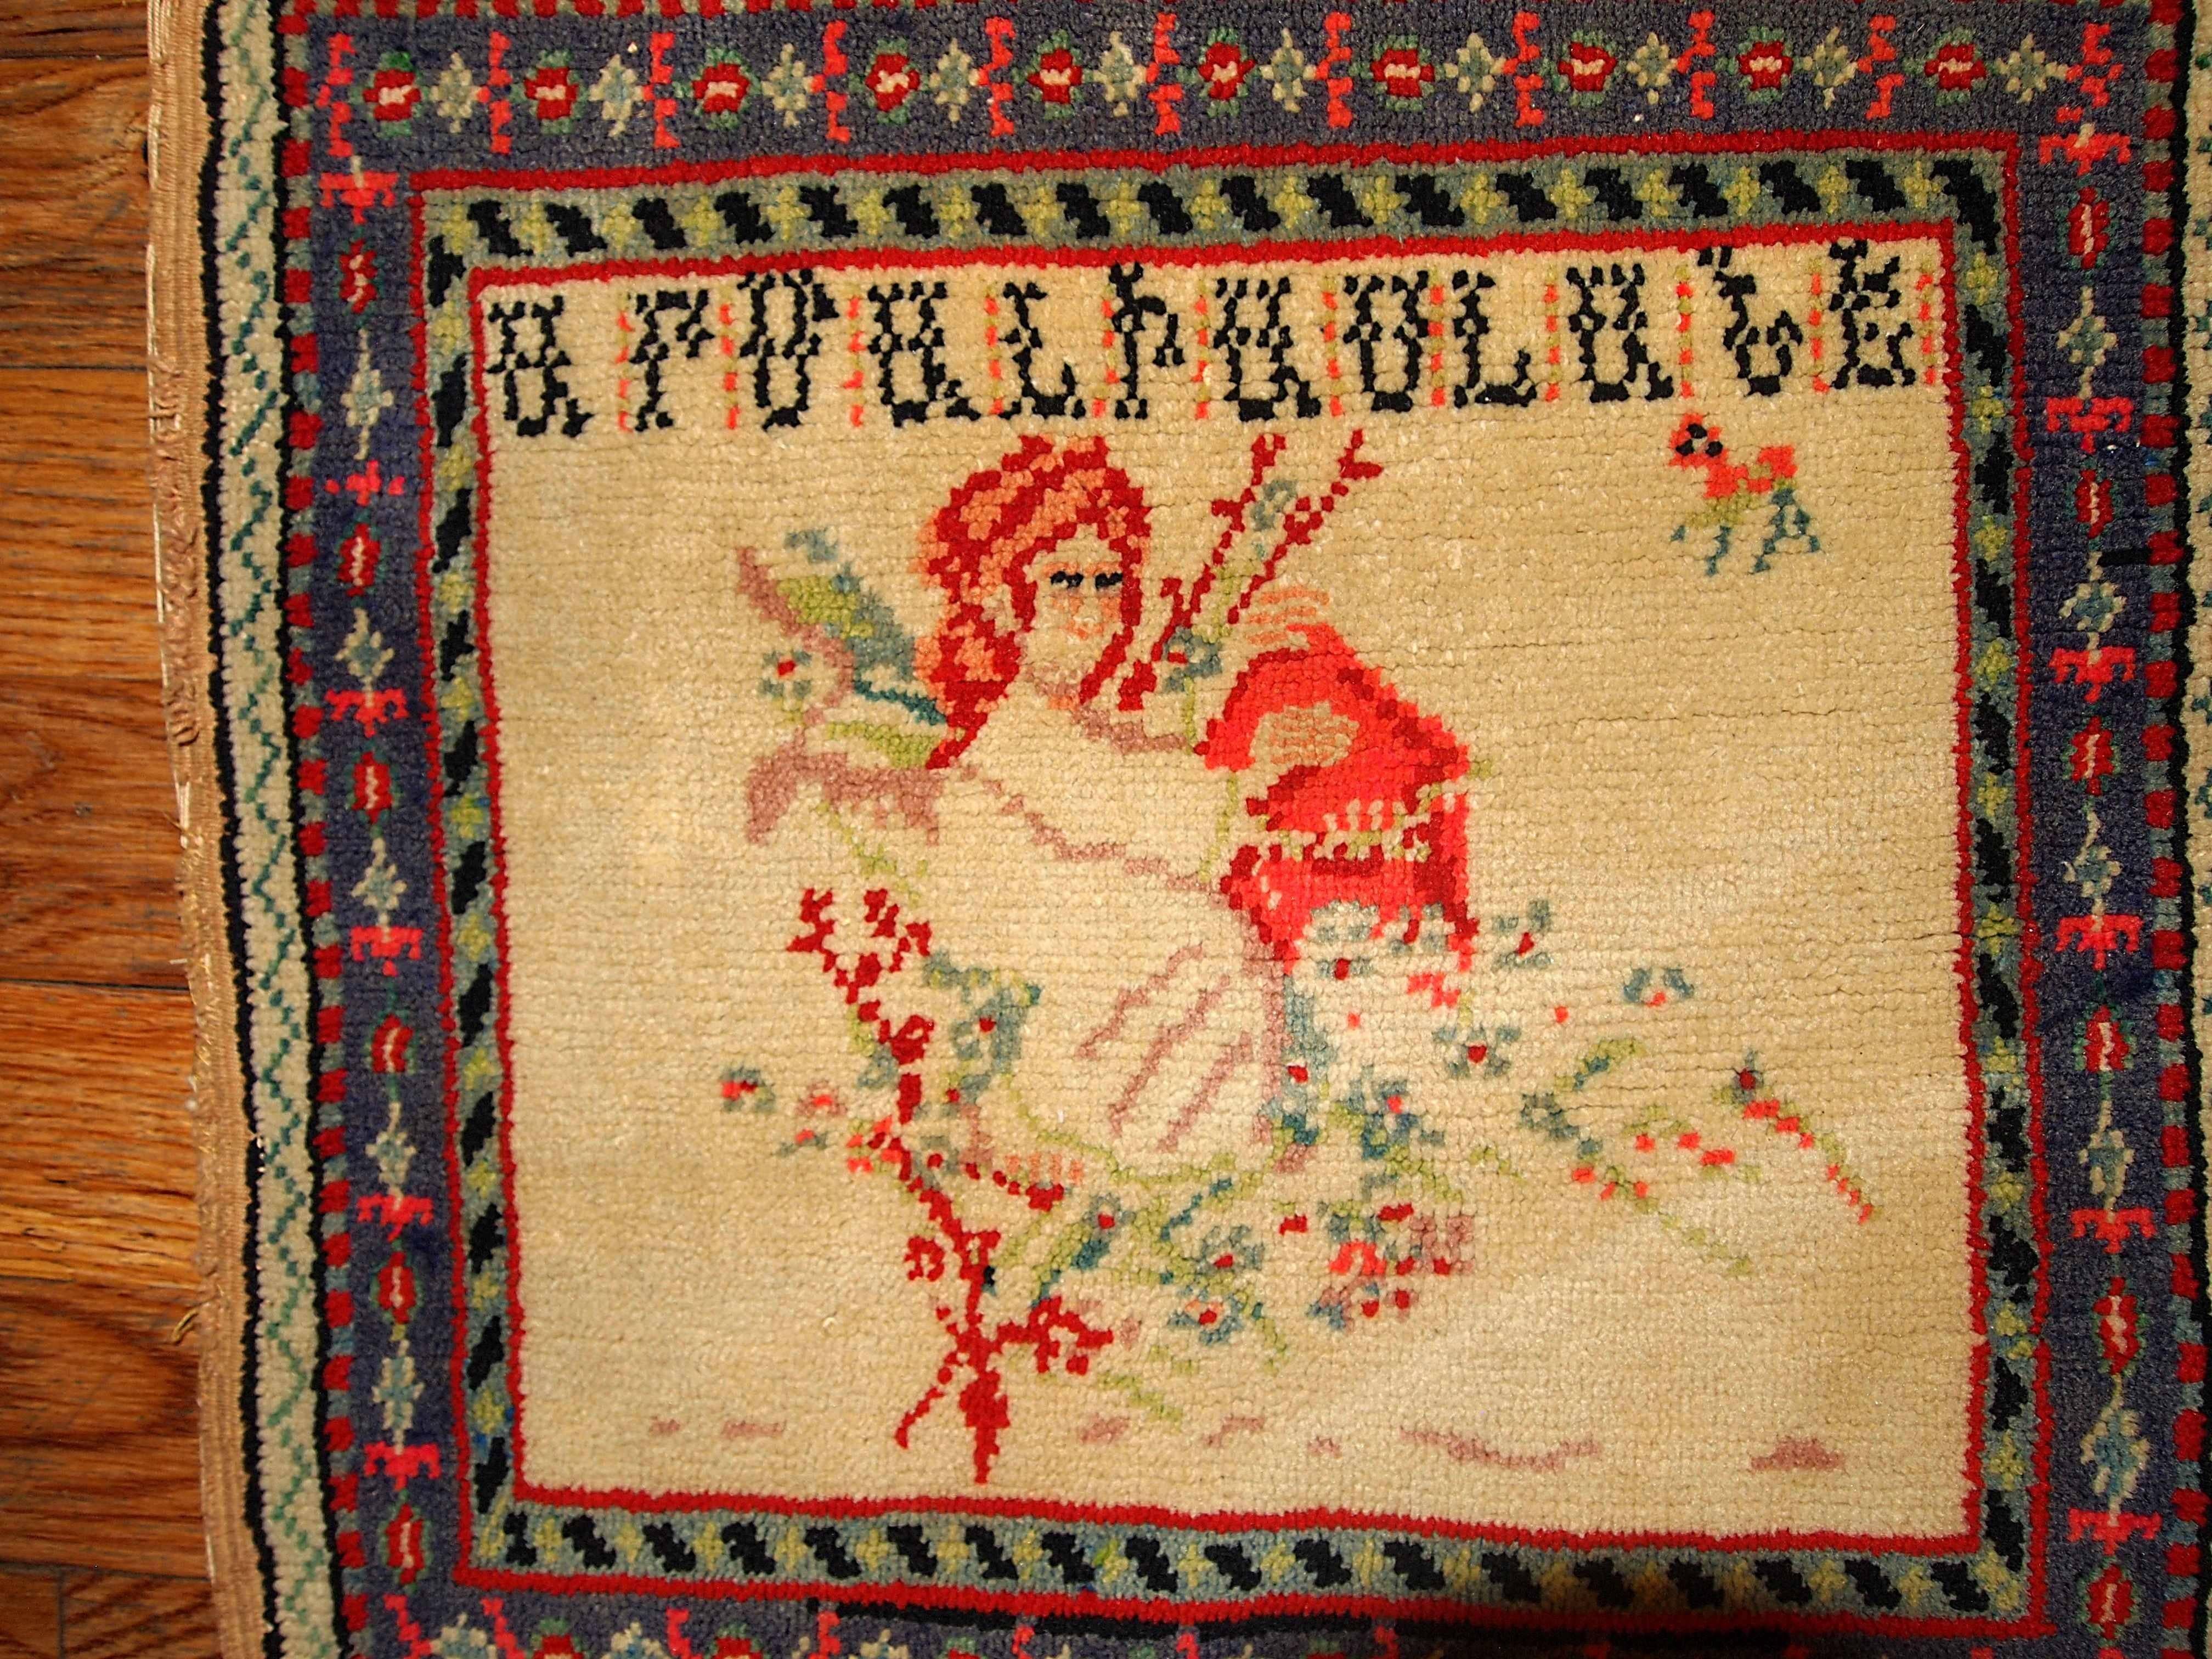 Handmade antique collectible Armenian rug specially made for weddings. This rug would have been given to a family in celebration of a wedding or as a dowry gift. That is an old Armenian tradition to present this type of rugs on this kind of